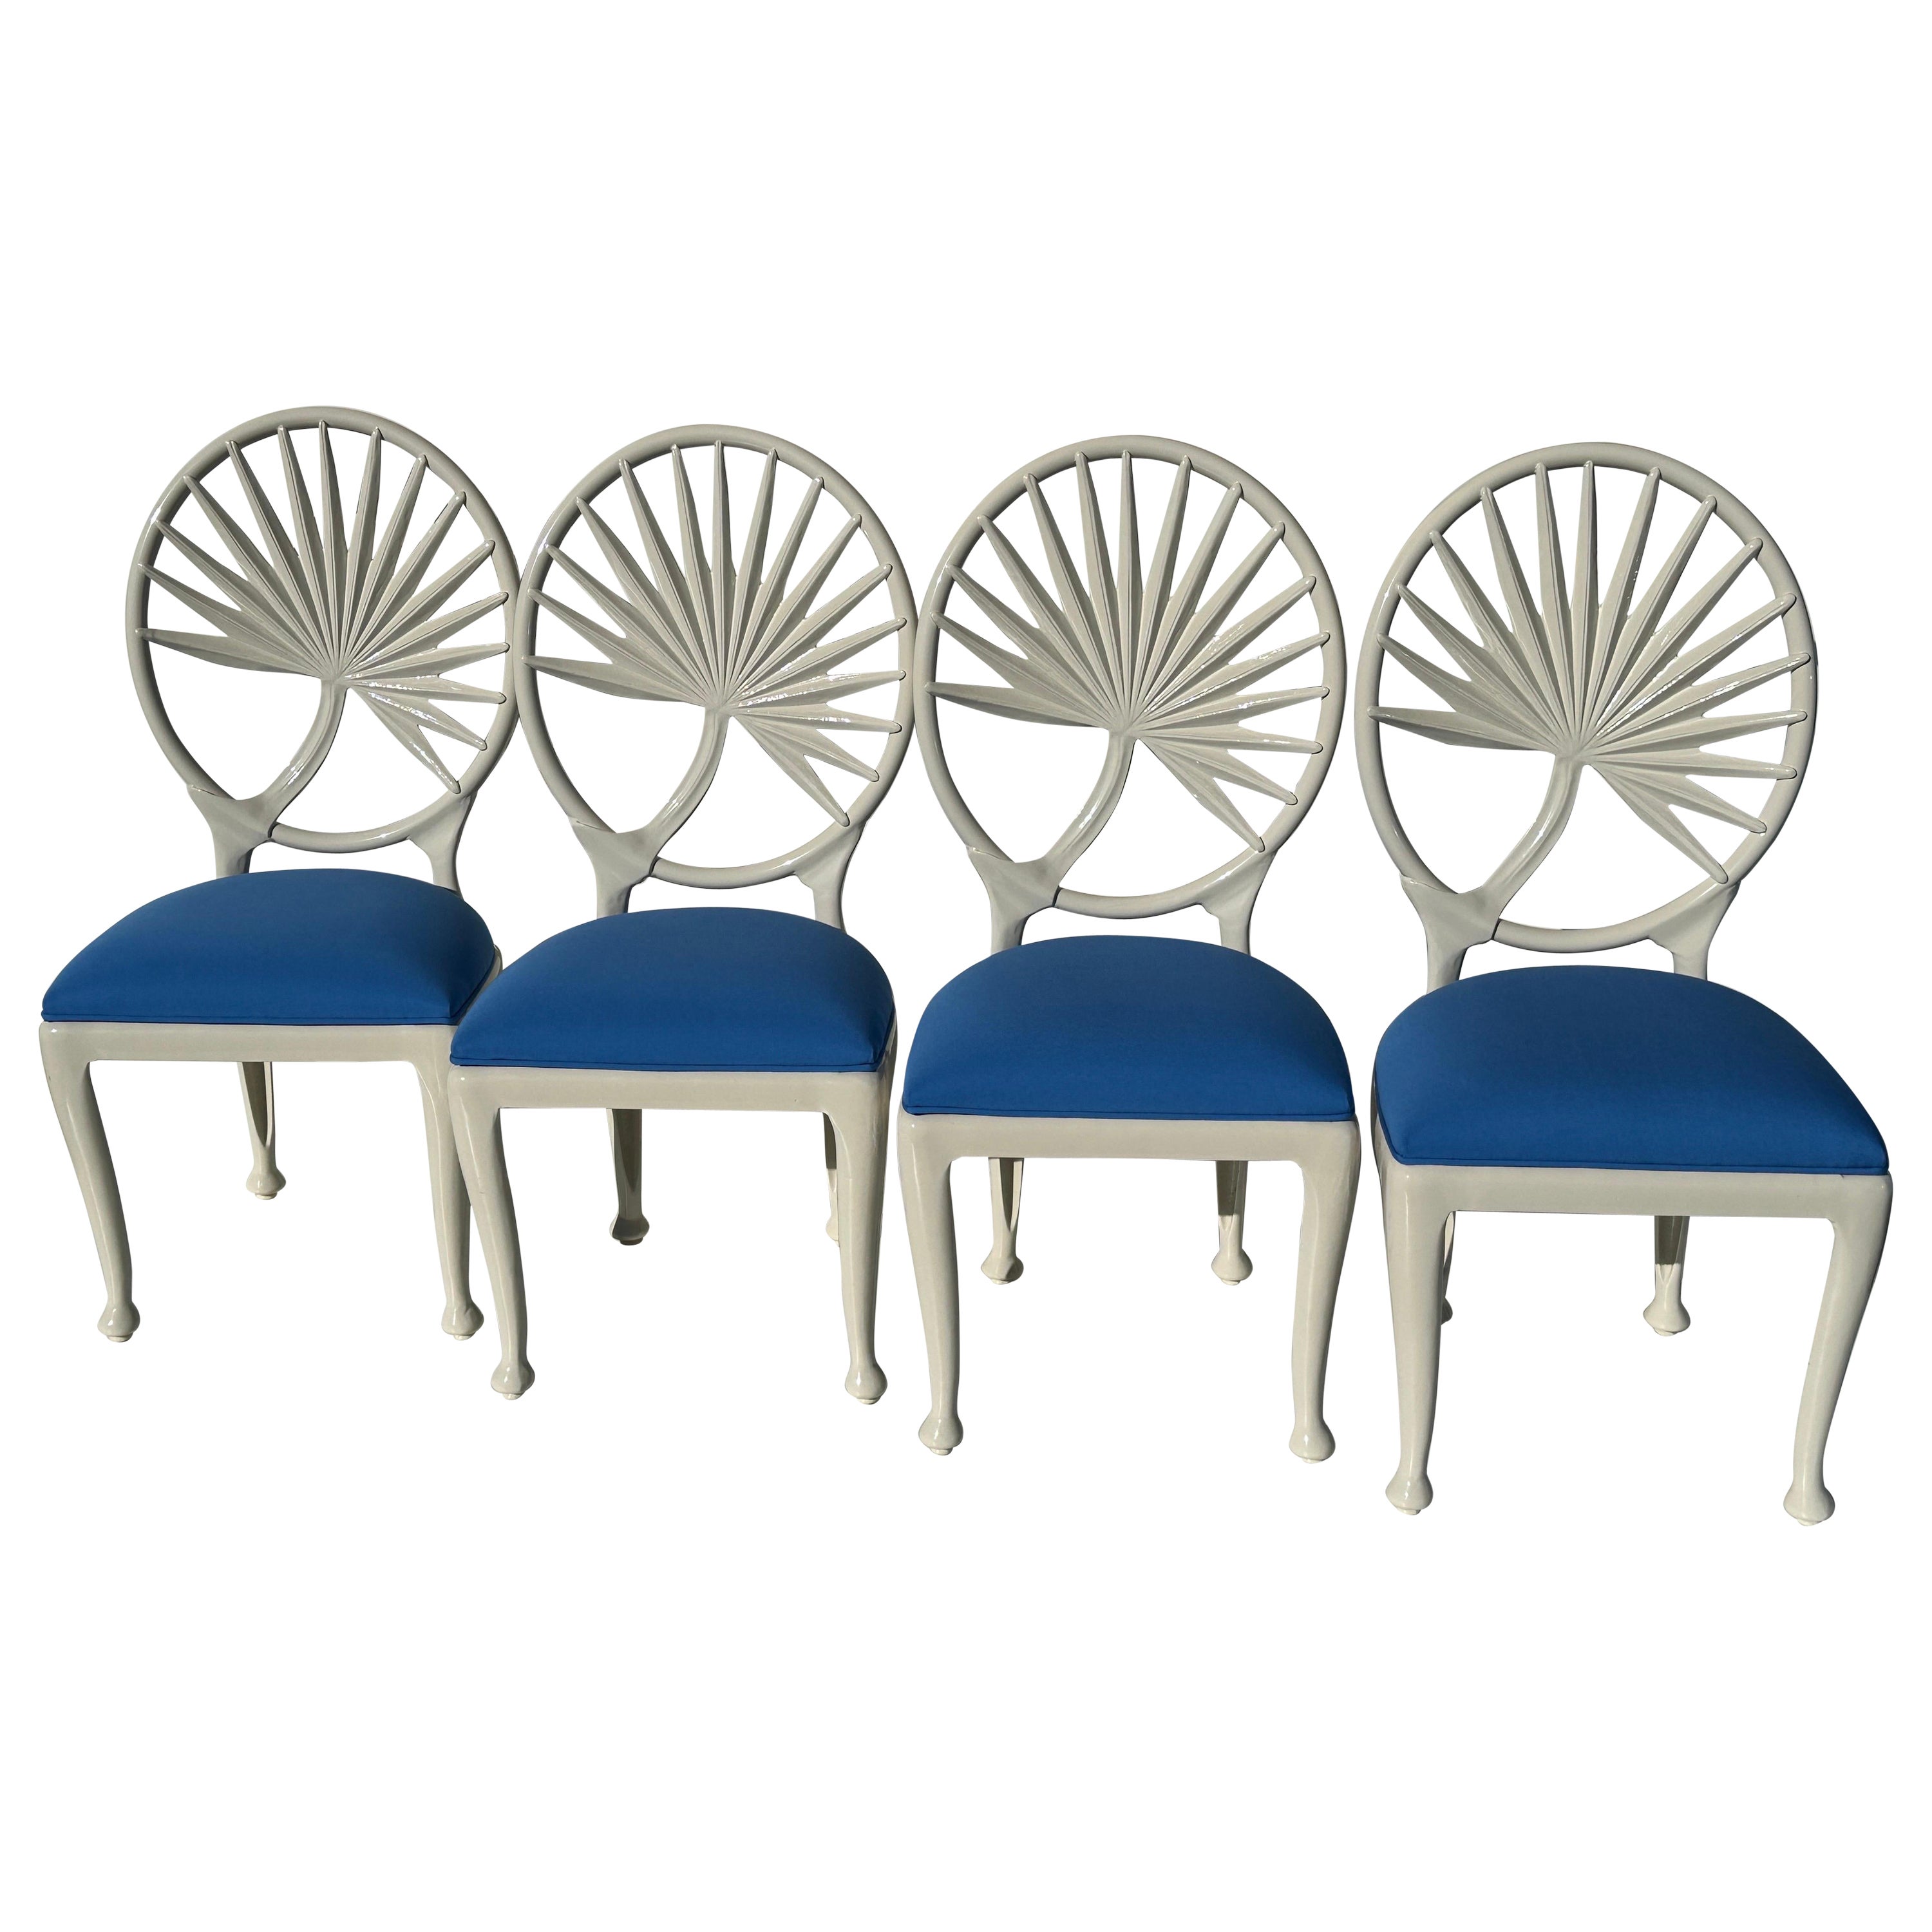 Set of Four Aluminum Chairs with Palm Leaf Motif